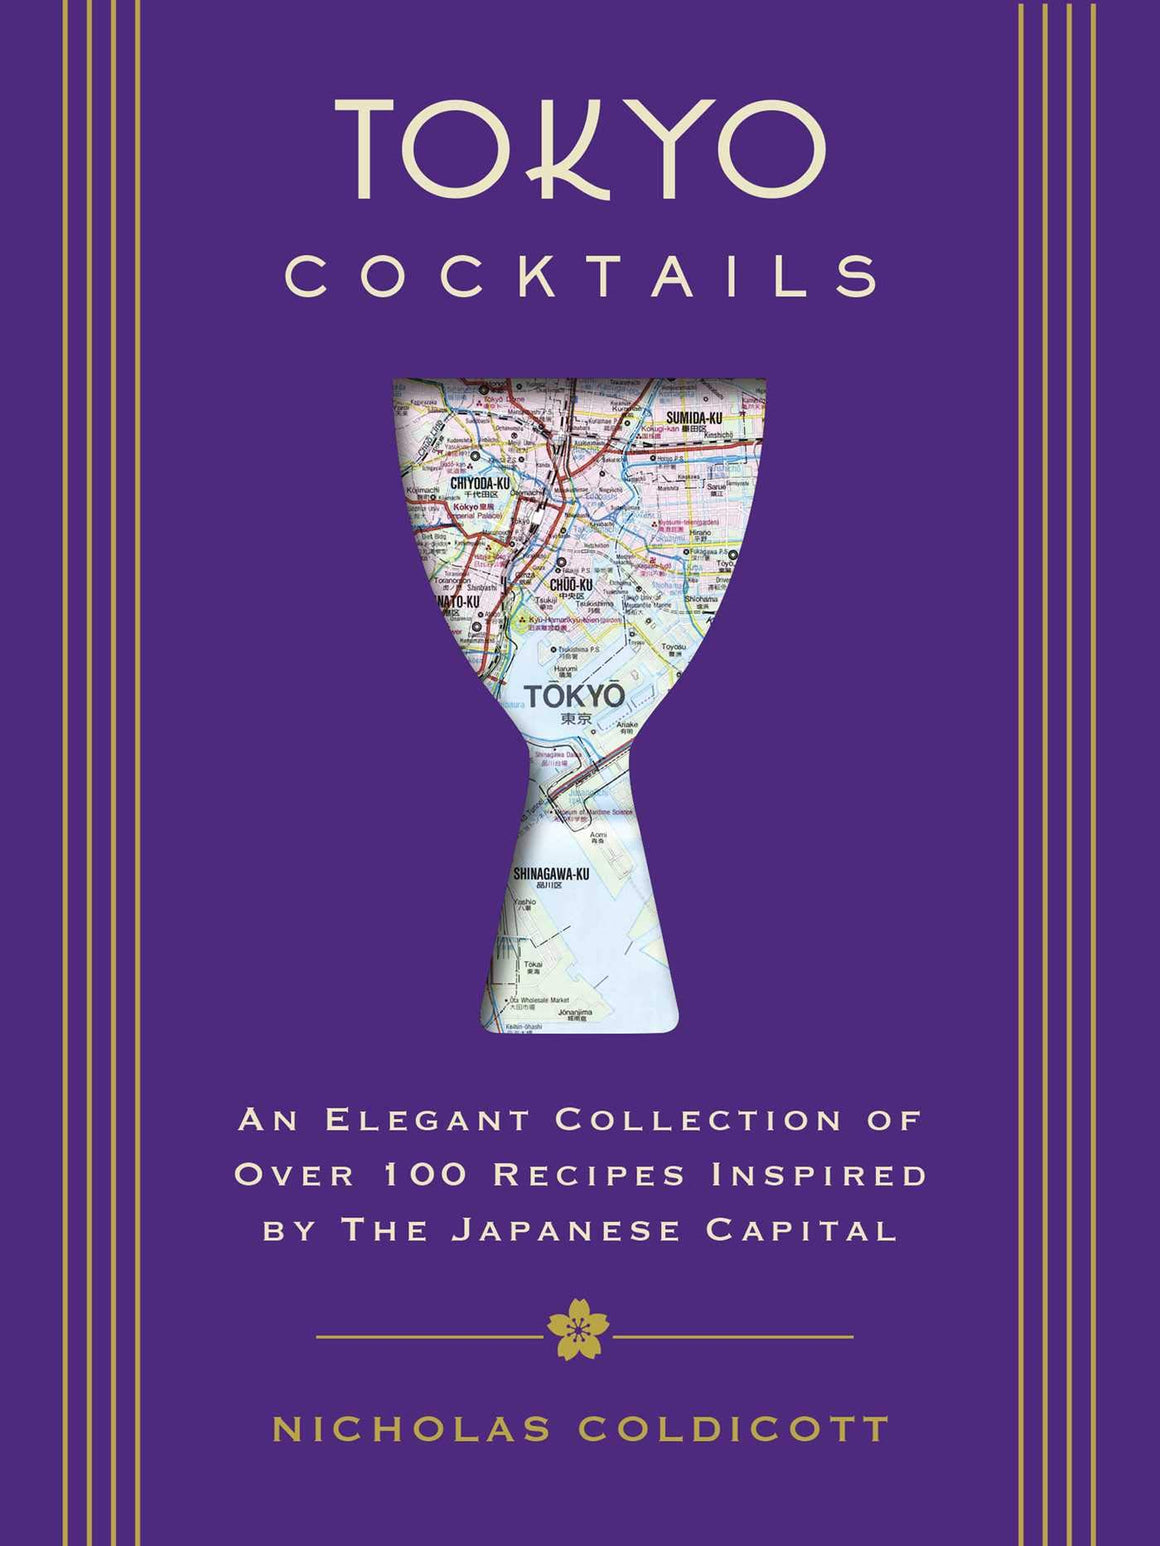 Tokyo Cocktails: An Elegant Collection of Over 100 Recipes Inspired by The Japanese Capital (Nicholas Coldicott)